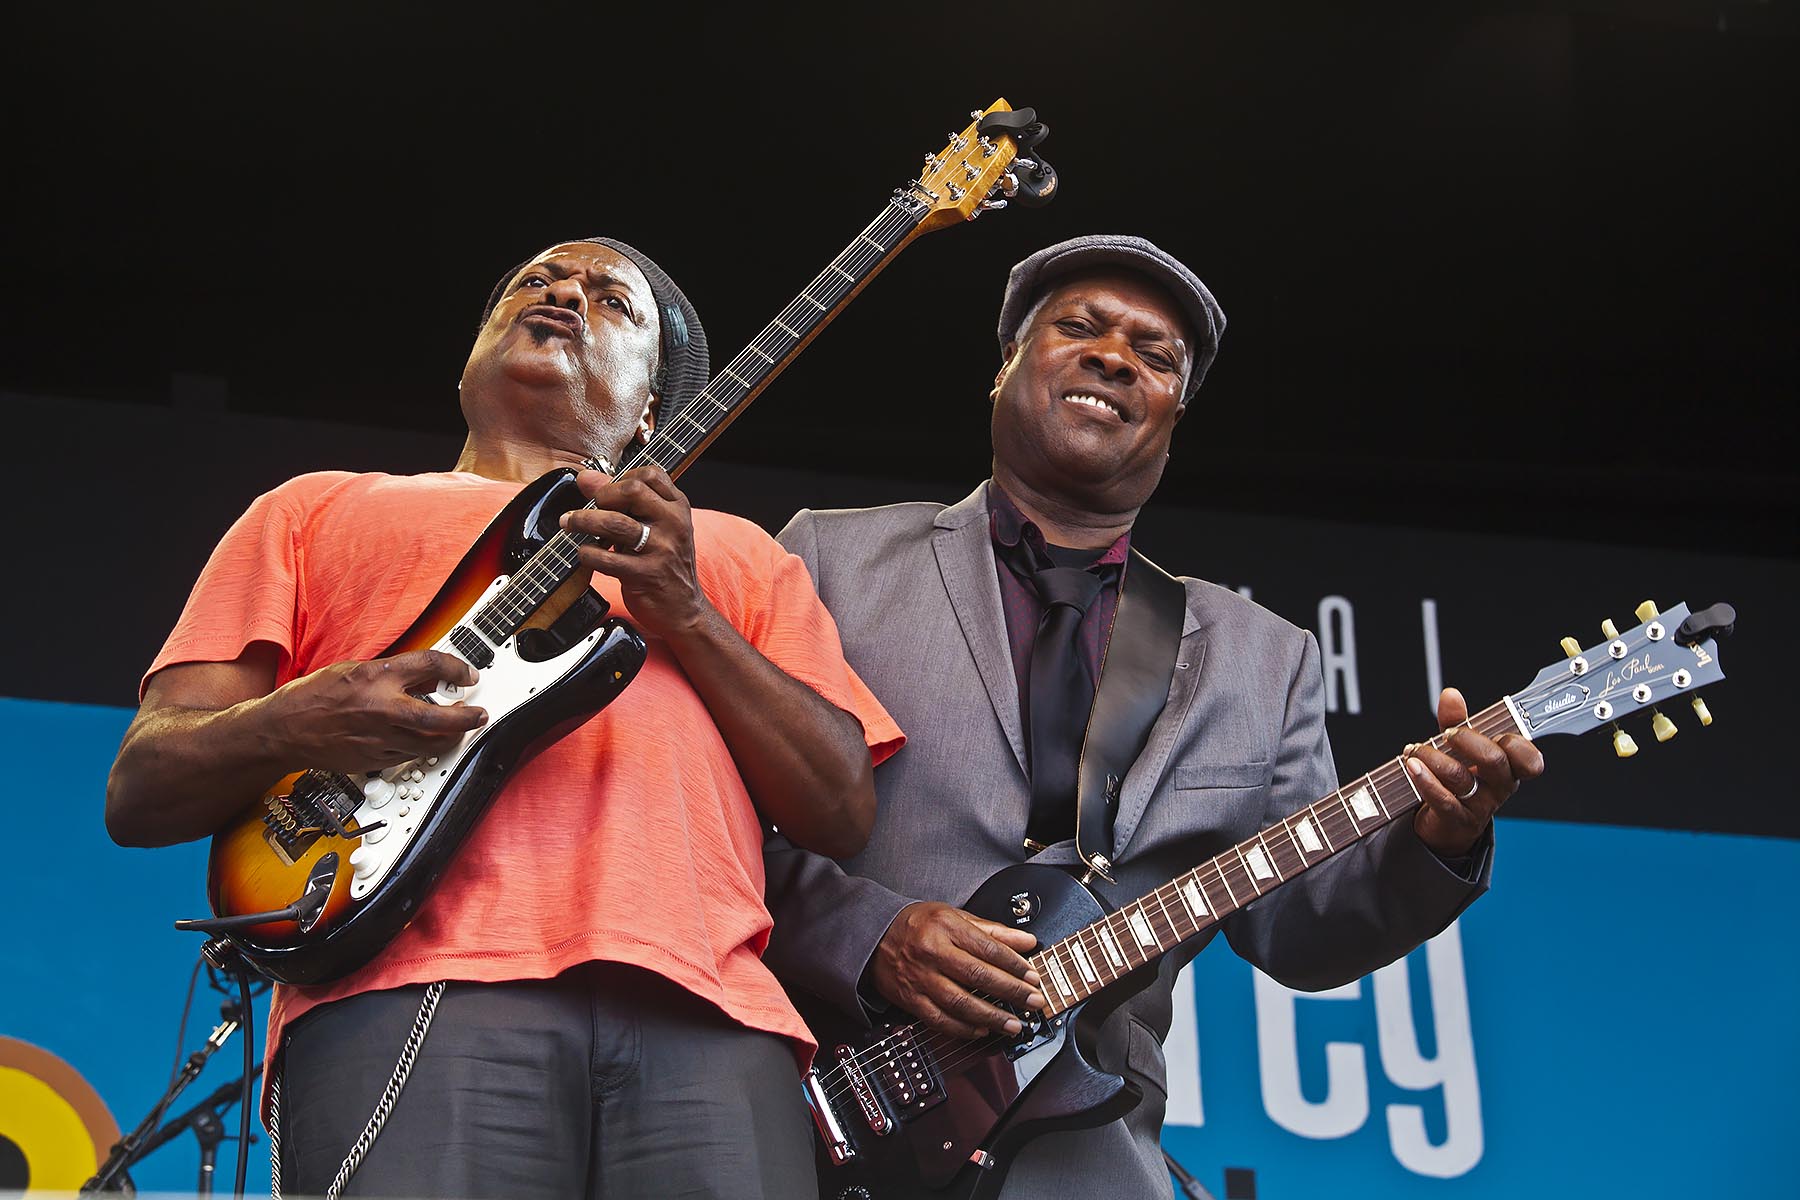 BOOKER T JONES and VERNON BLACK preform on the main stage at the MONTEREY JAZZ FESTIVAL